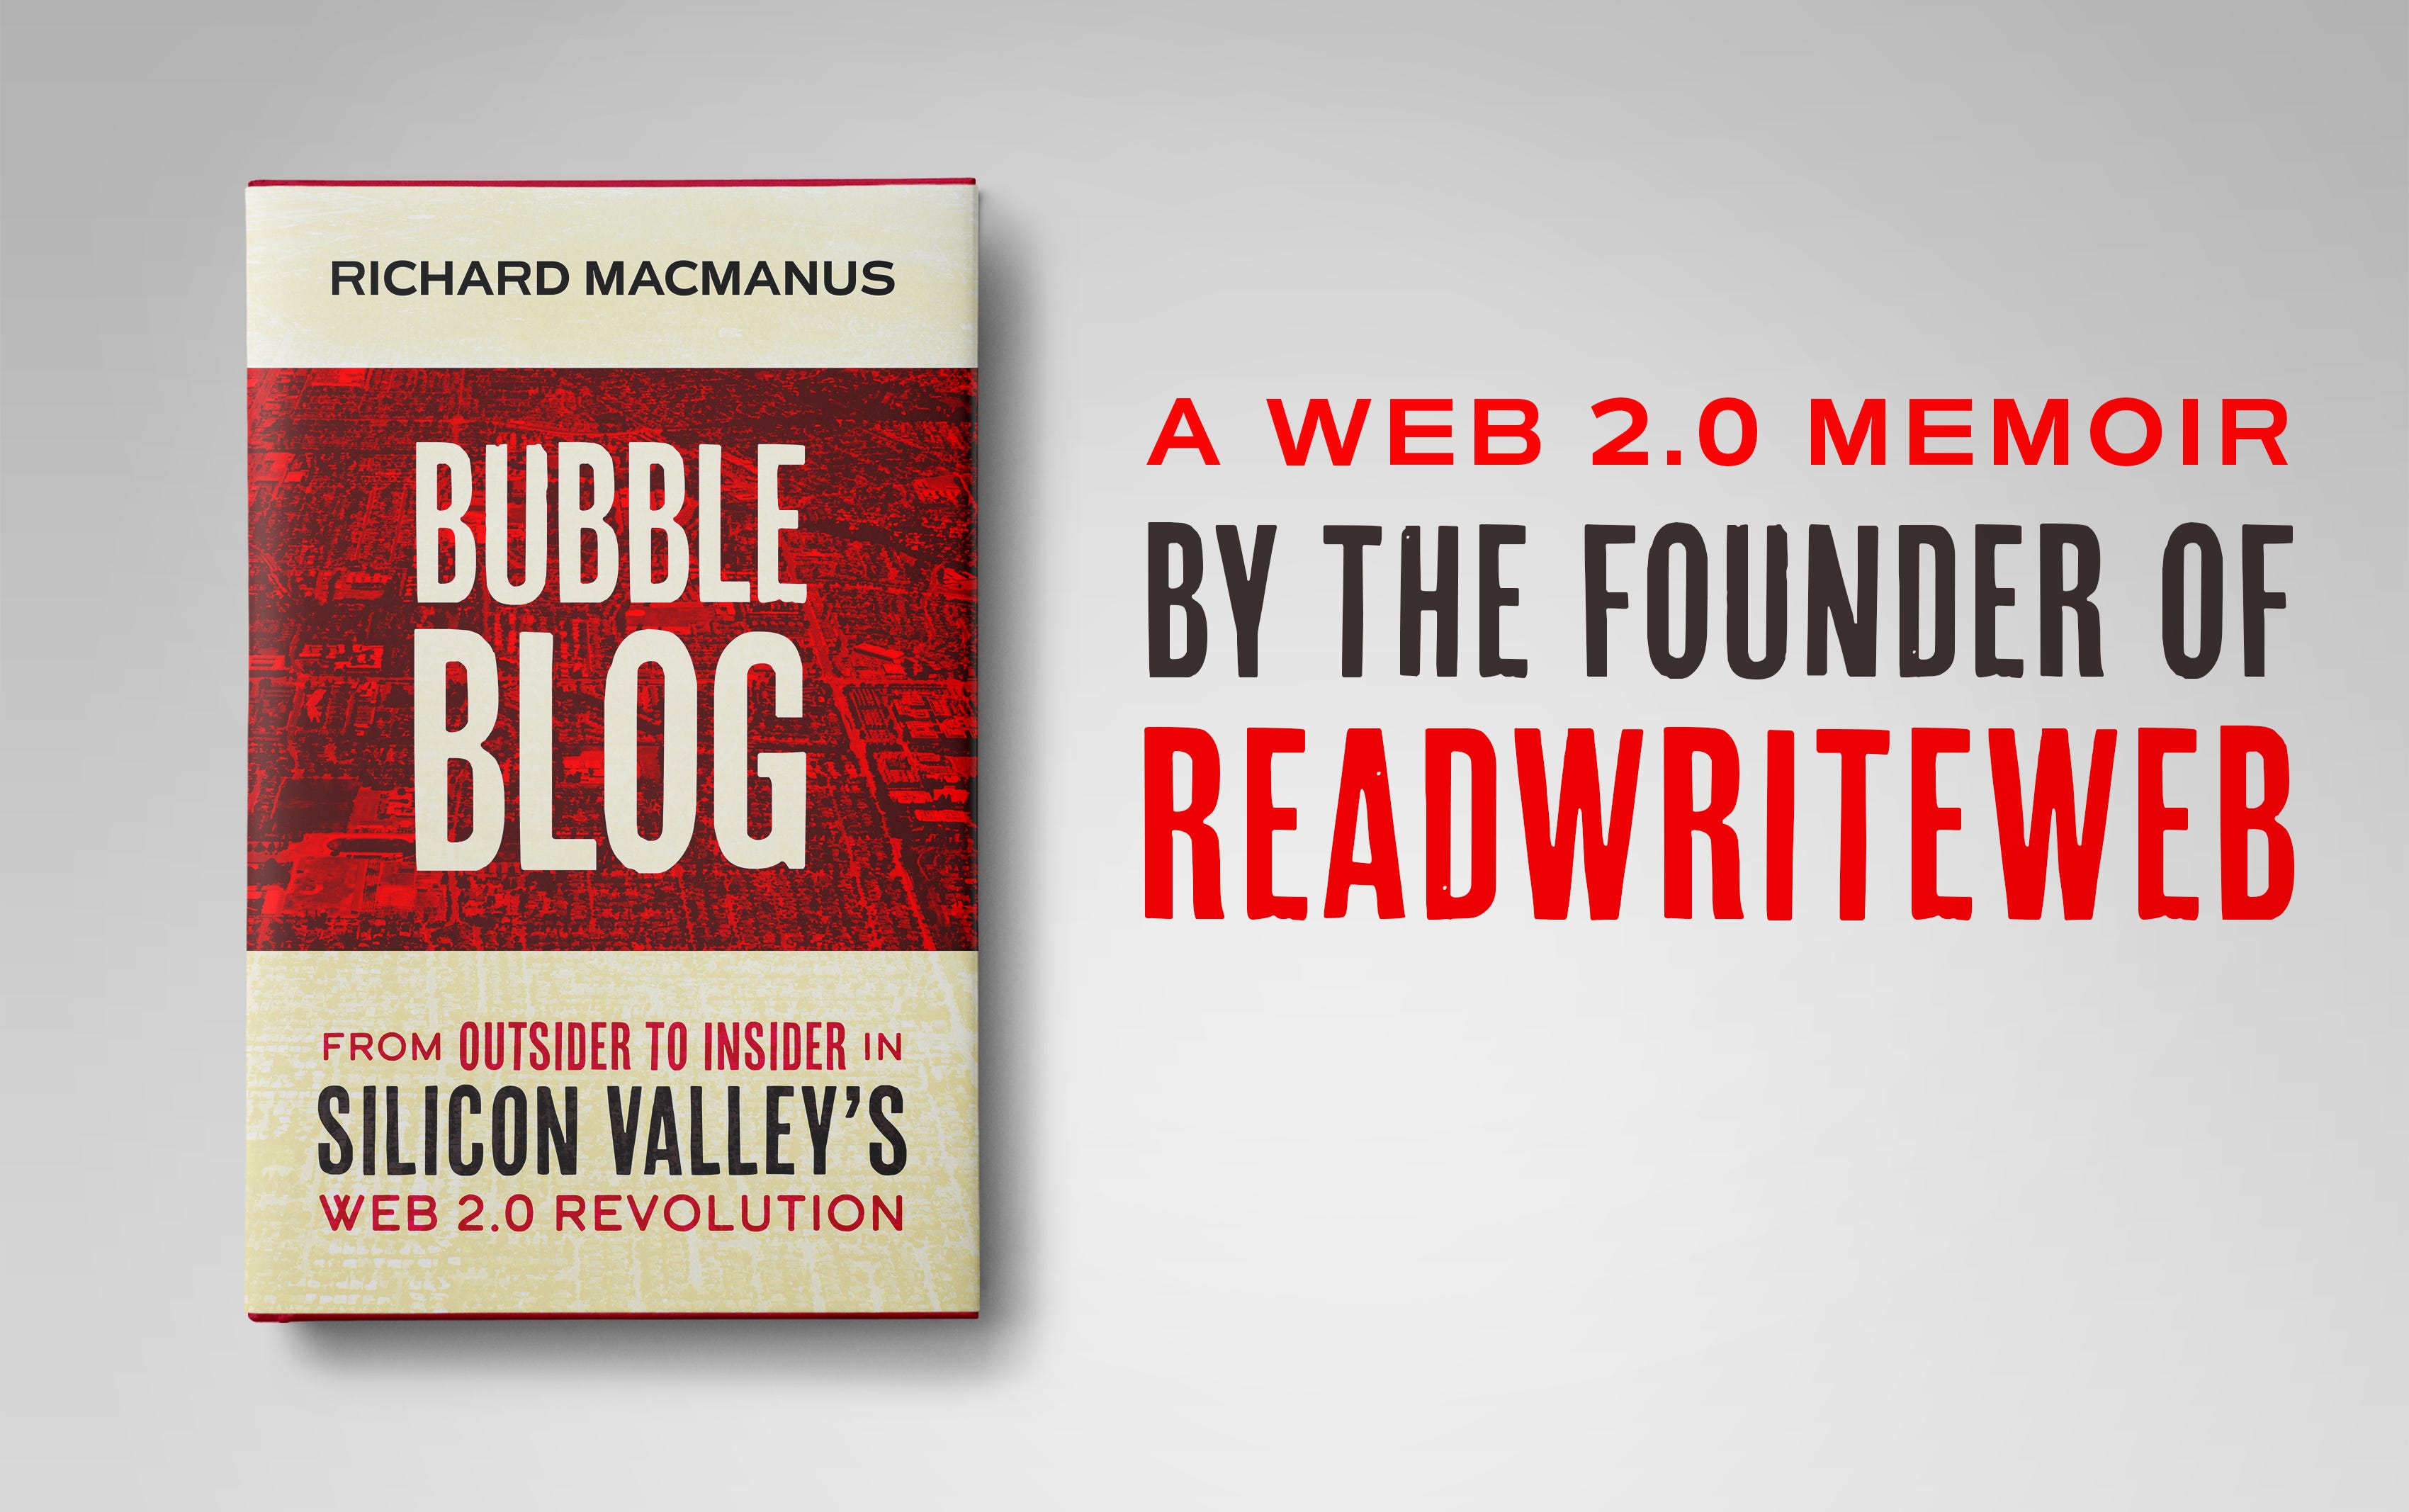 Bubble Blog: From Outsider to Insider in Silicon Valley's Web 2.0 Revolution